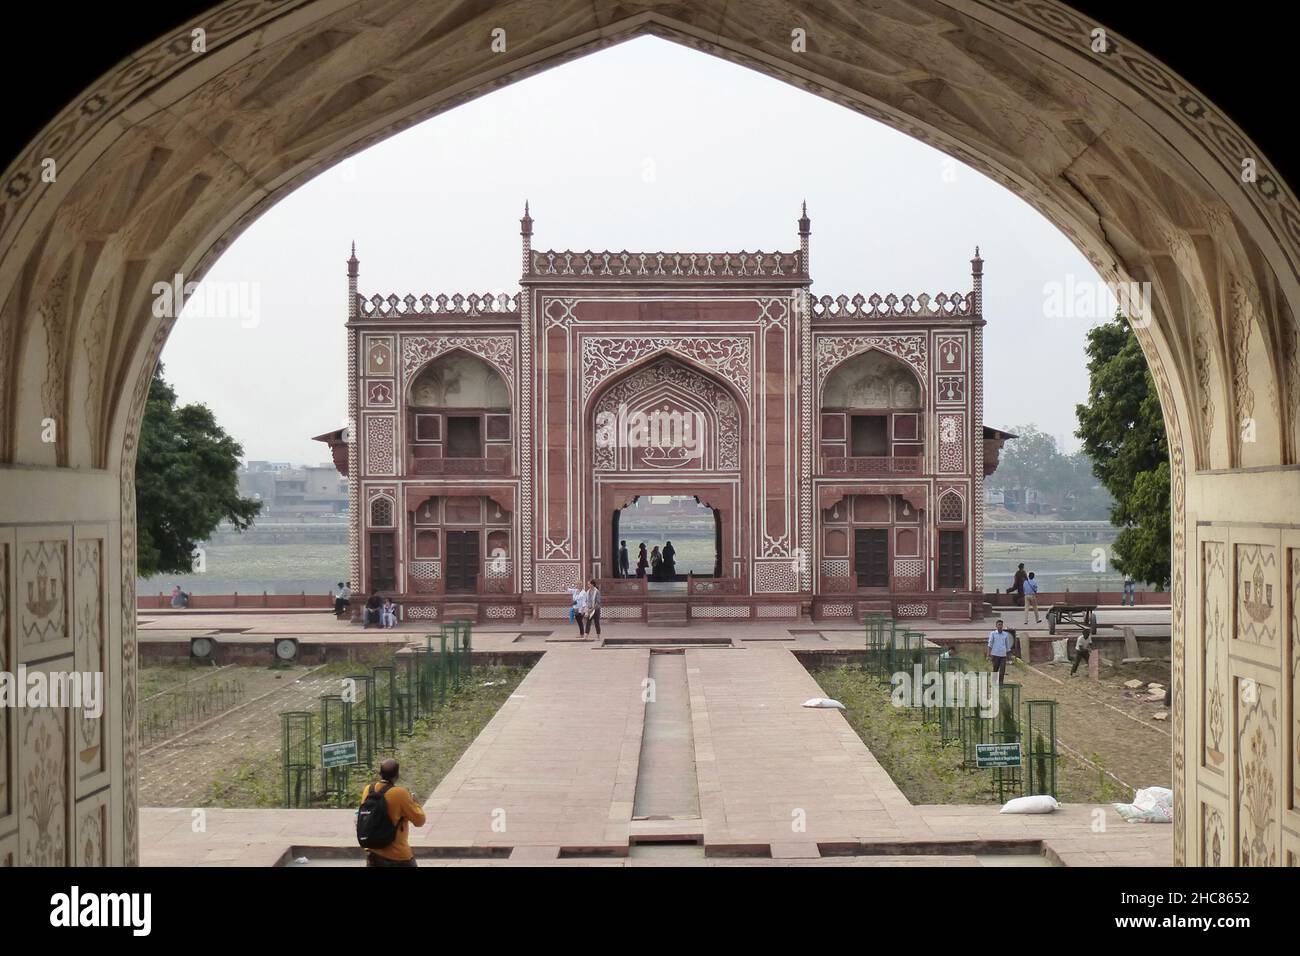 Entrance of the Itmad-ud-Daula mausoleum in Agra Stock Photo